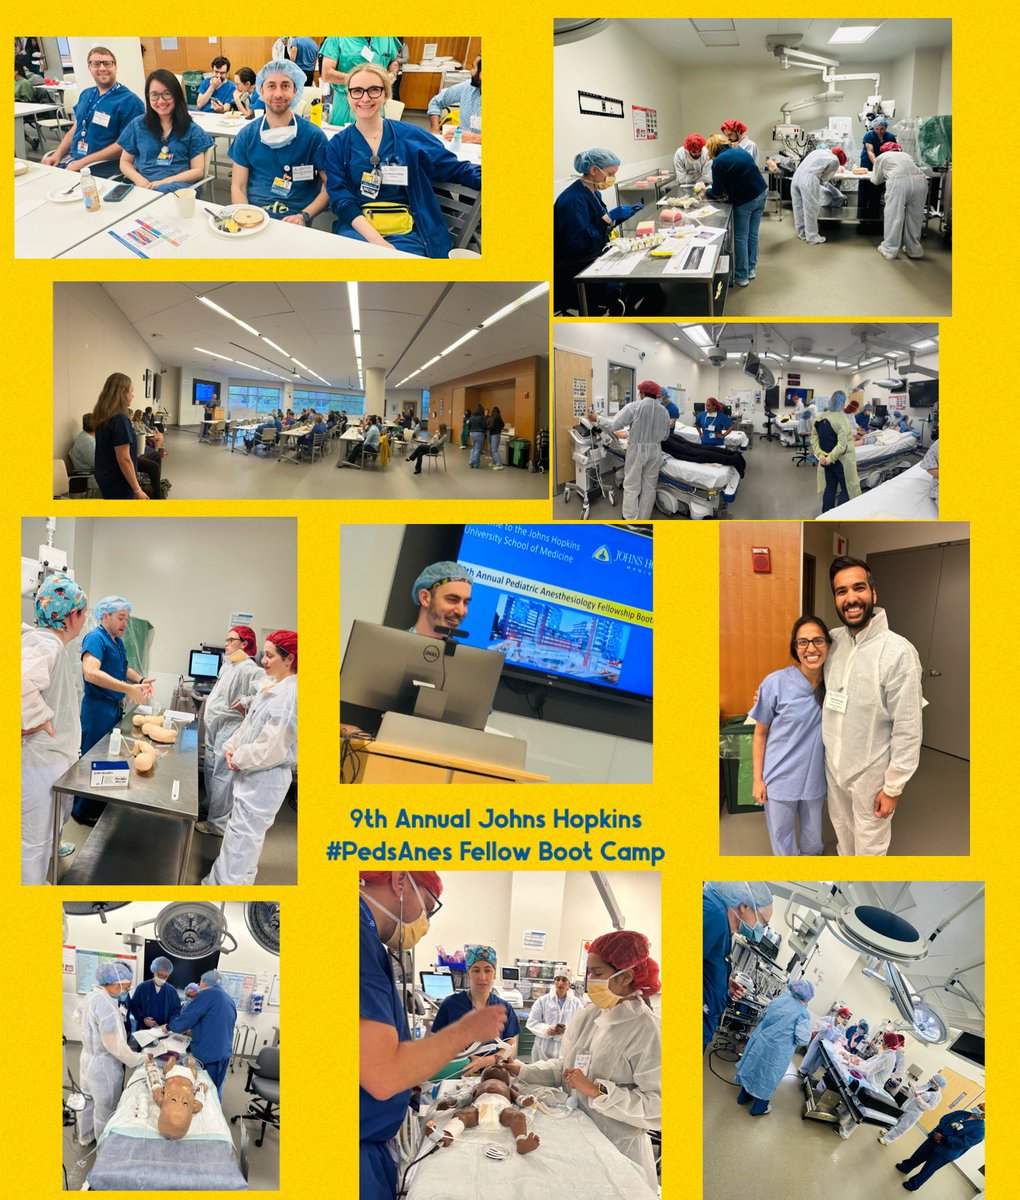 We are only 45 minutes into the 𝟗𝐭𝐡 𝐀𝐧𝐧𝐮𝐚𝐥 @JHPedsAnes 𝐅𝐞𝐥𝐥𝐨𝐰 𝐁𝐨𝐨𝐭 𝐂𝐚𝐦𝐩 & WOW! 🤩 High fidelity OR #simulation, #regionalanesthesia, mass casualty training, the learning is boundless! Thanks to all the amazing #PedsAnes Fellows & faculty joining us